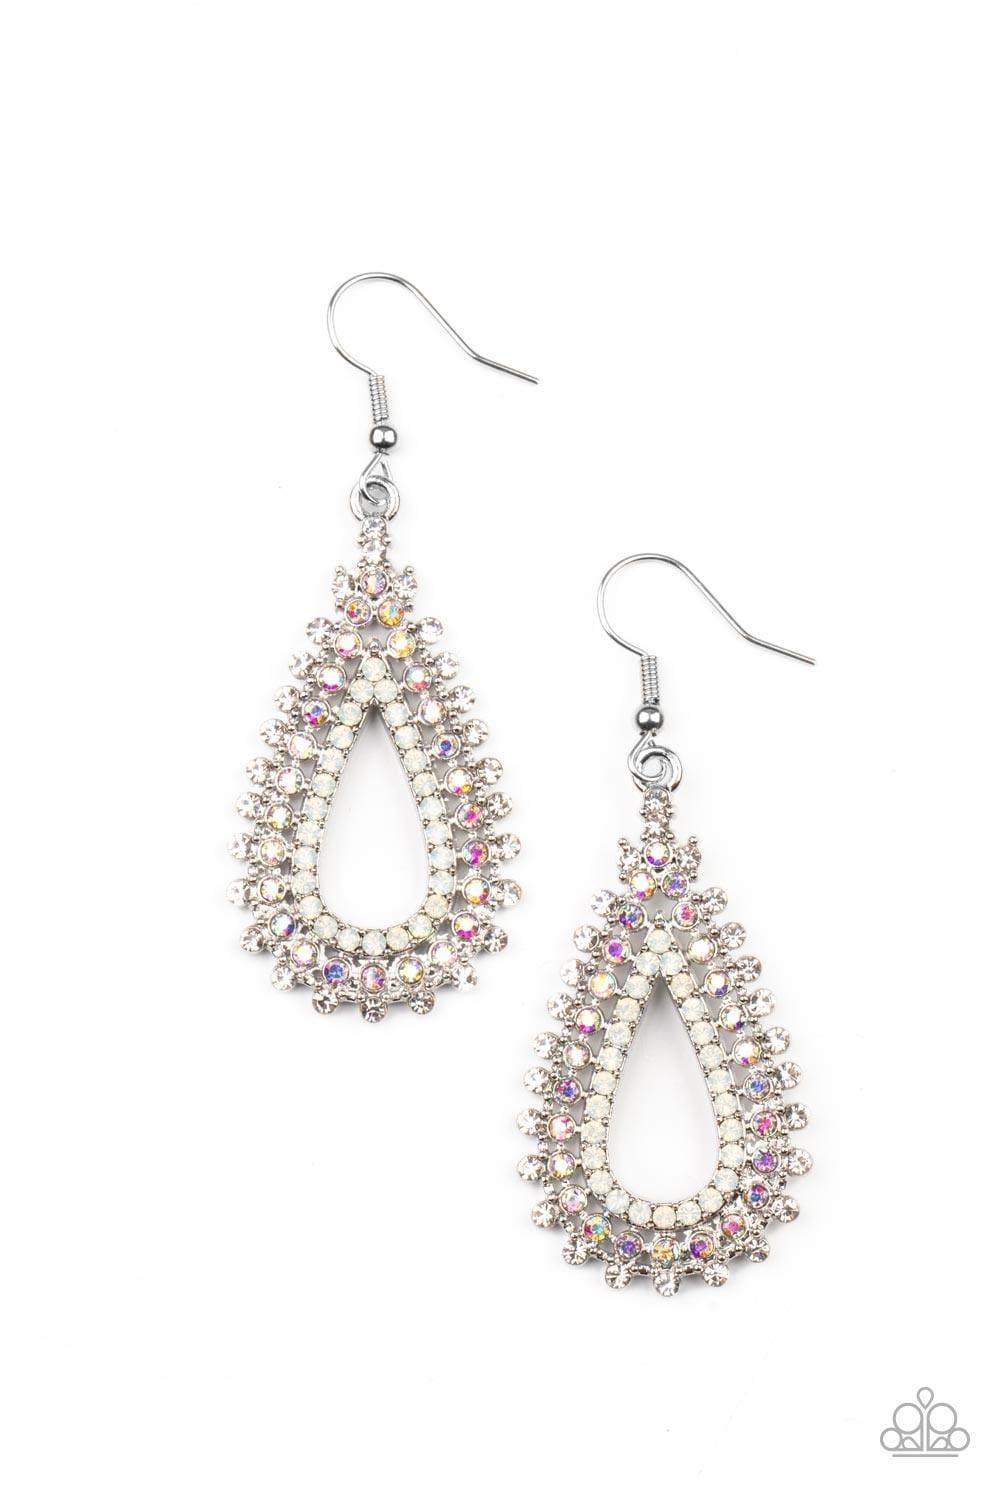 Paparazzi Accessories - The Works - Multicolor Earrings - Bling by JessieK